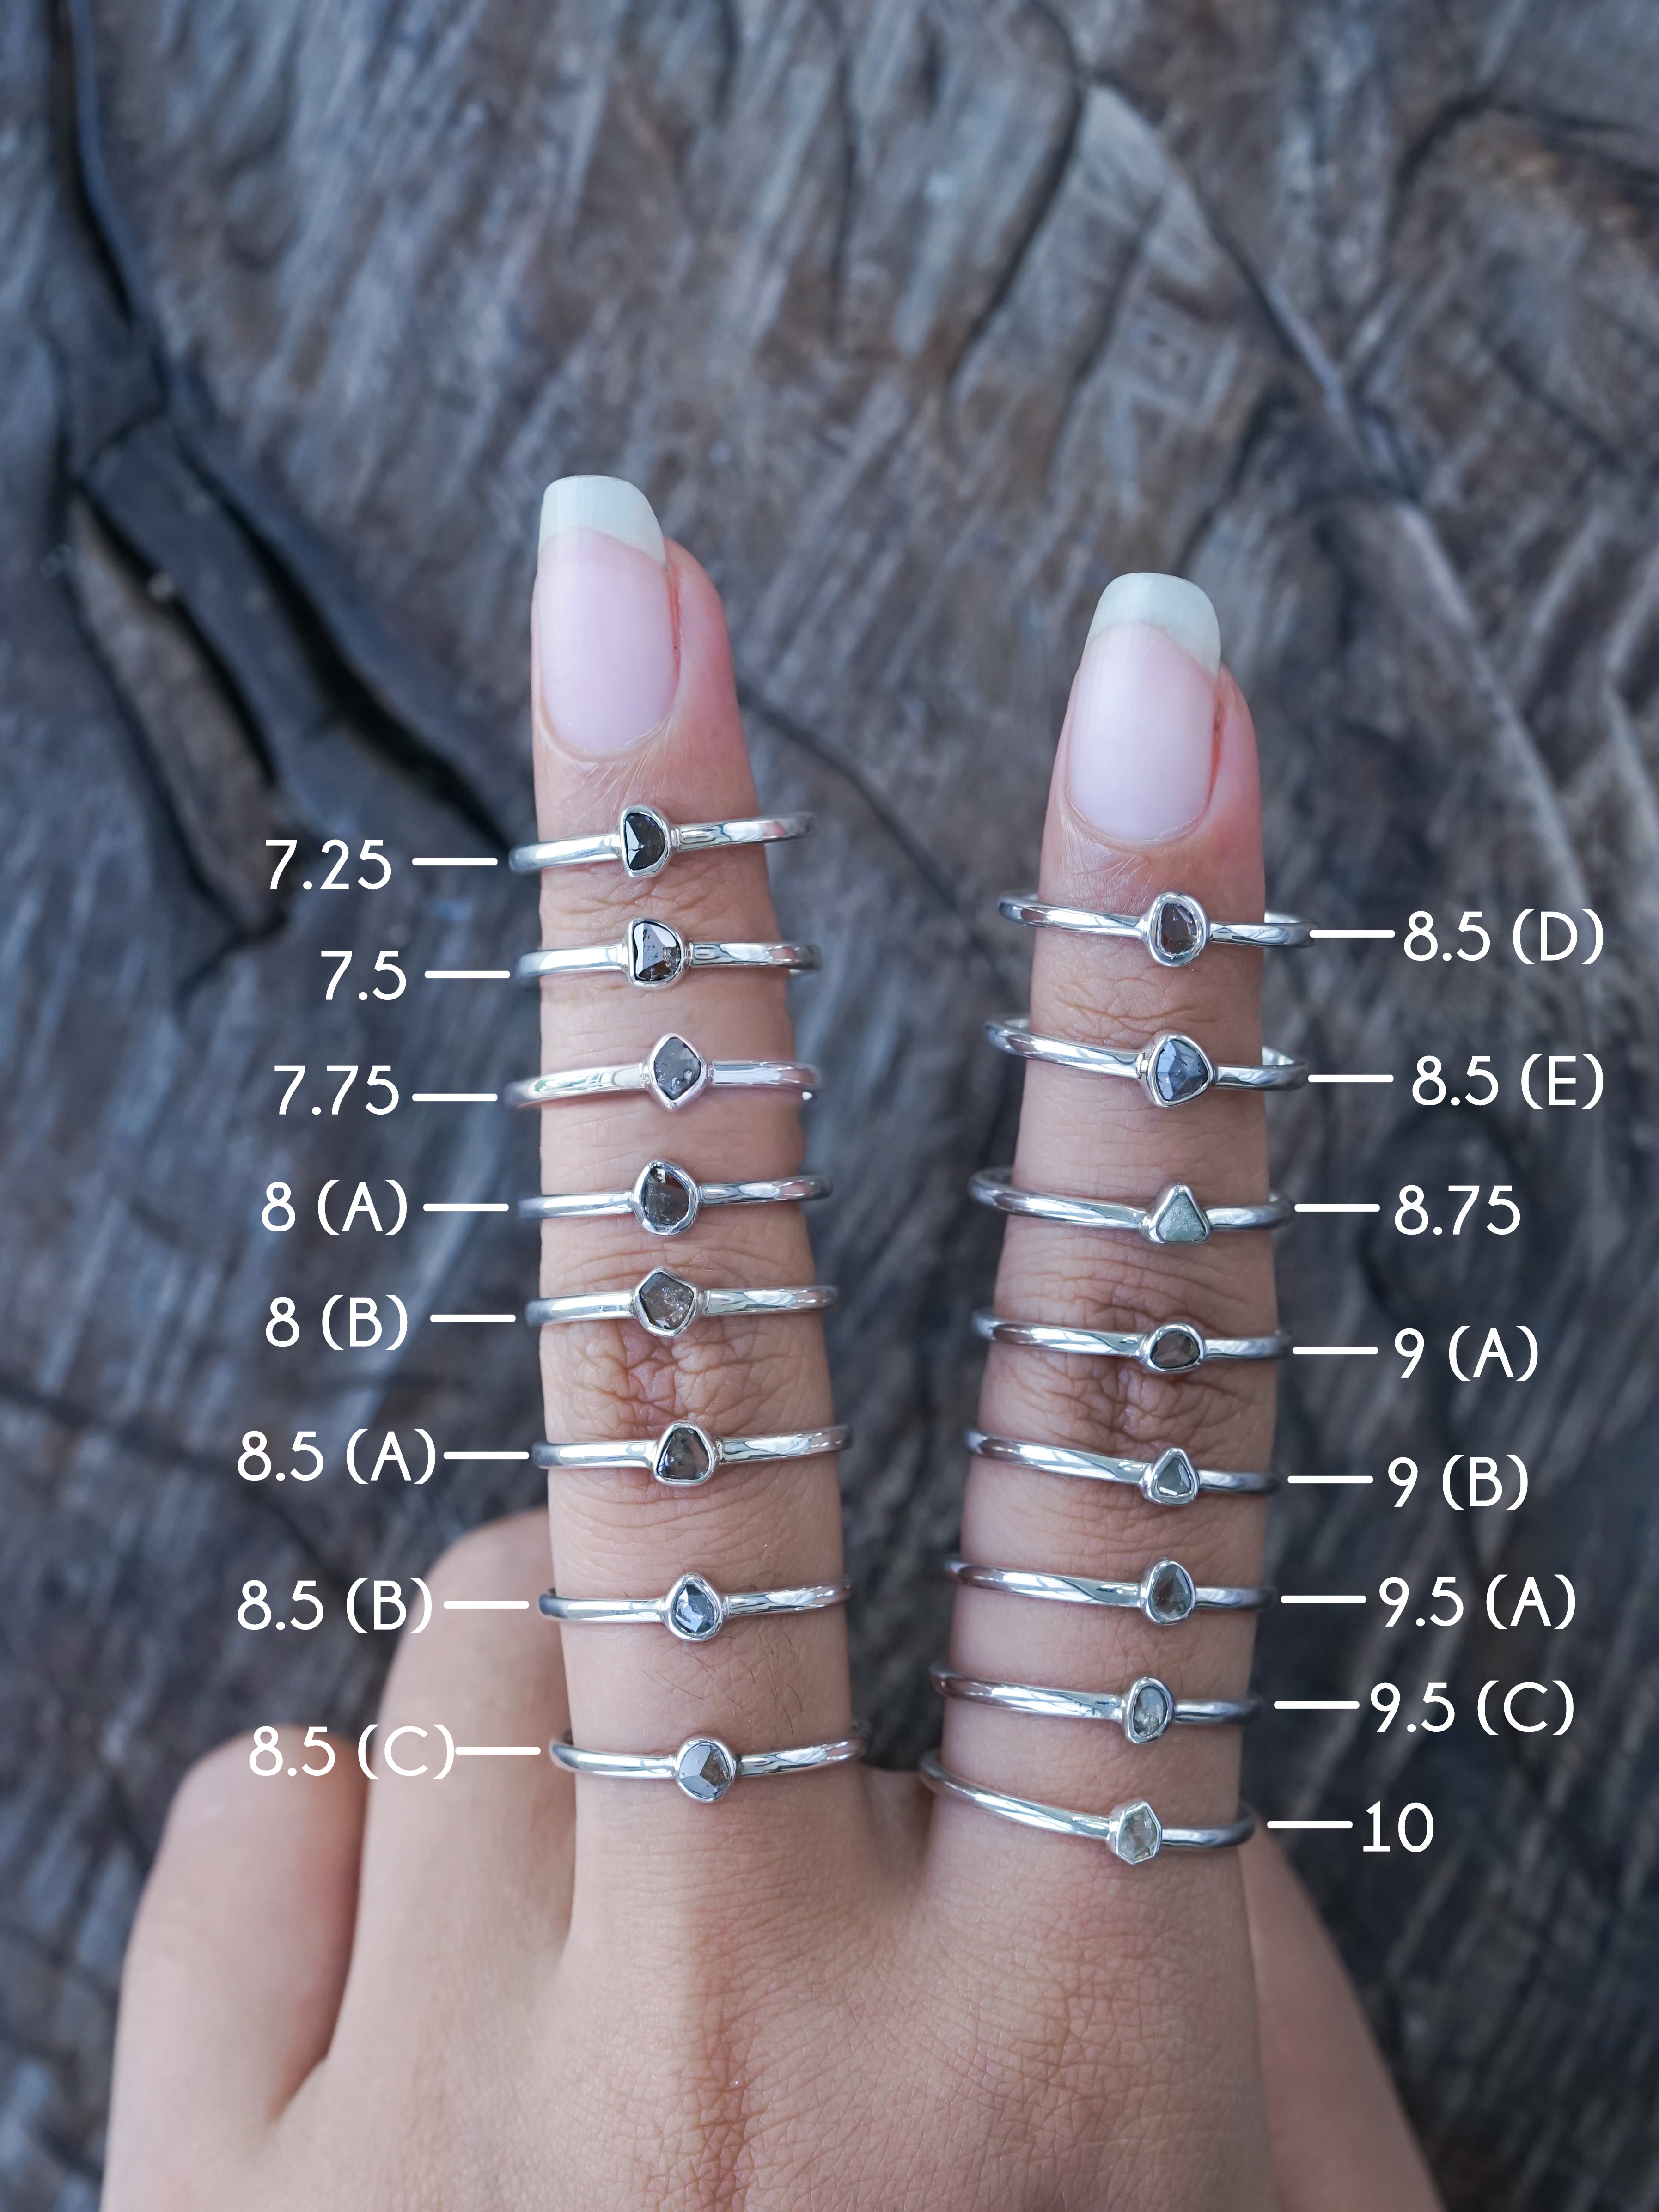 Amazon.com: Spiral Silver Splint Ring for Trigger Finger : Handmade Products